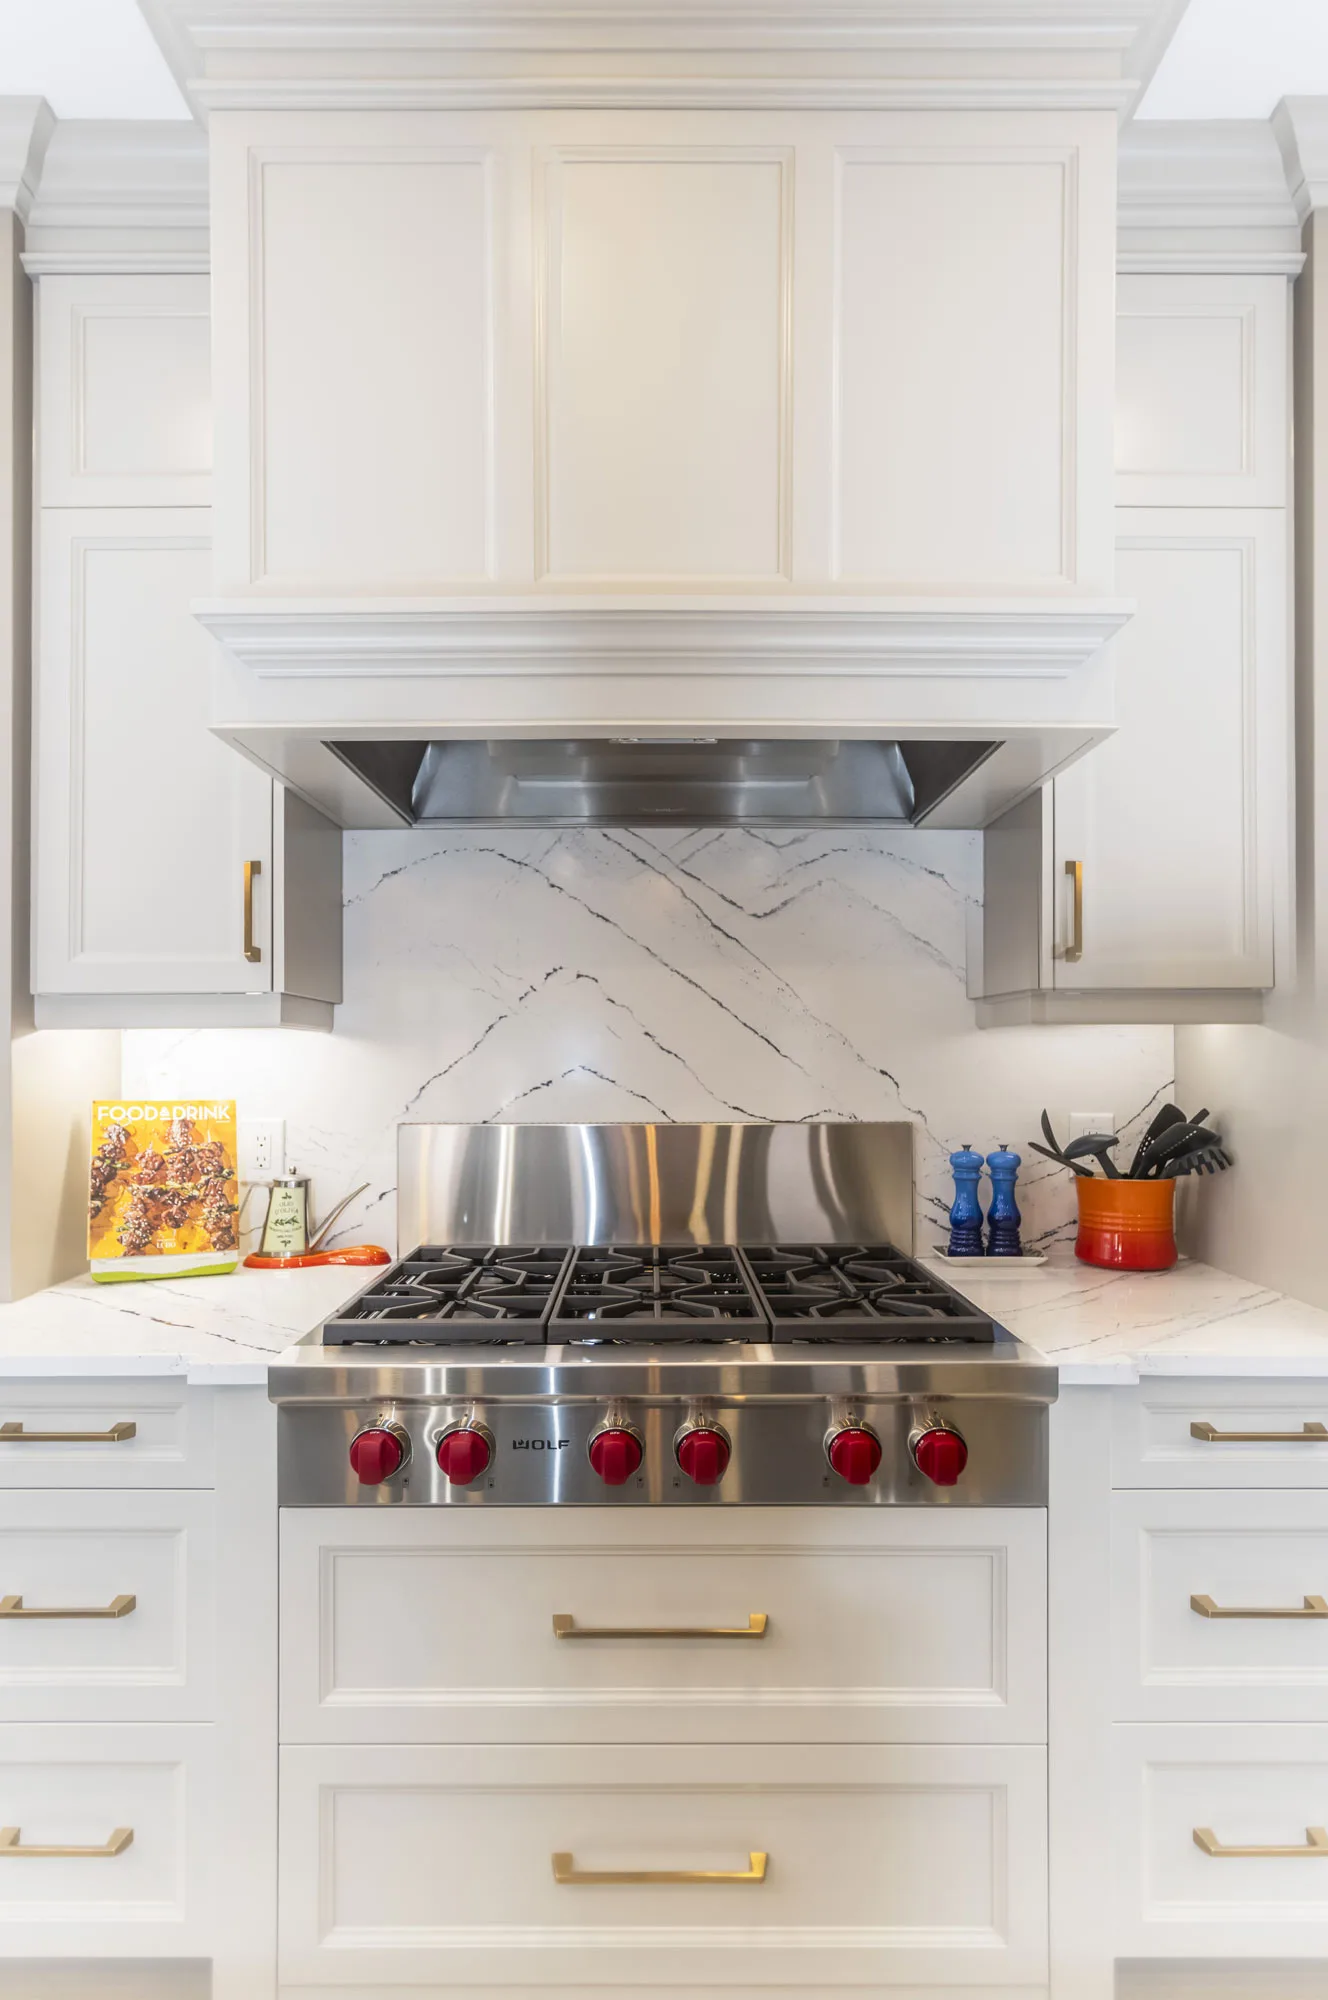 Close up of off-white cabinets and gold hardware with a gas stove top with red handles